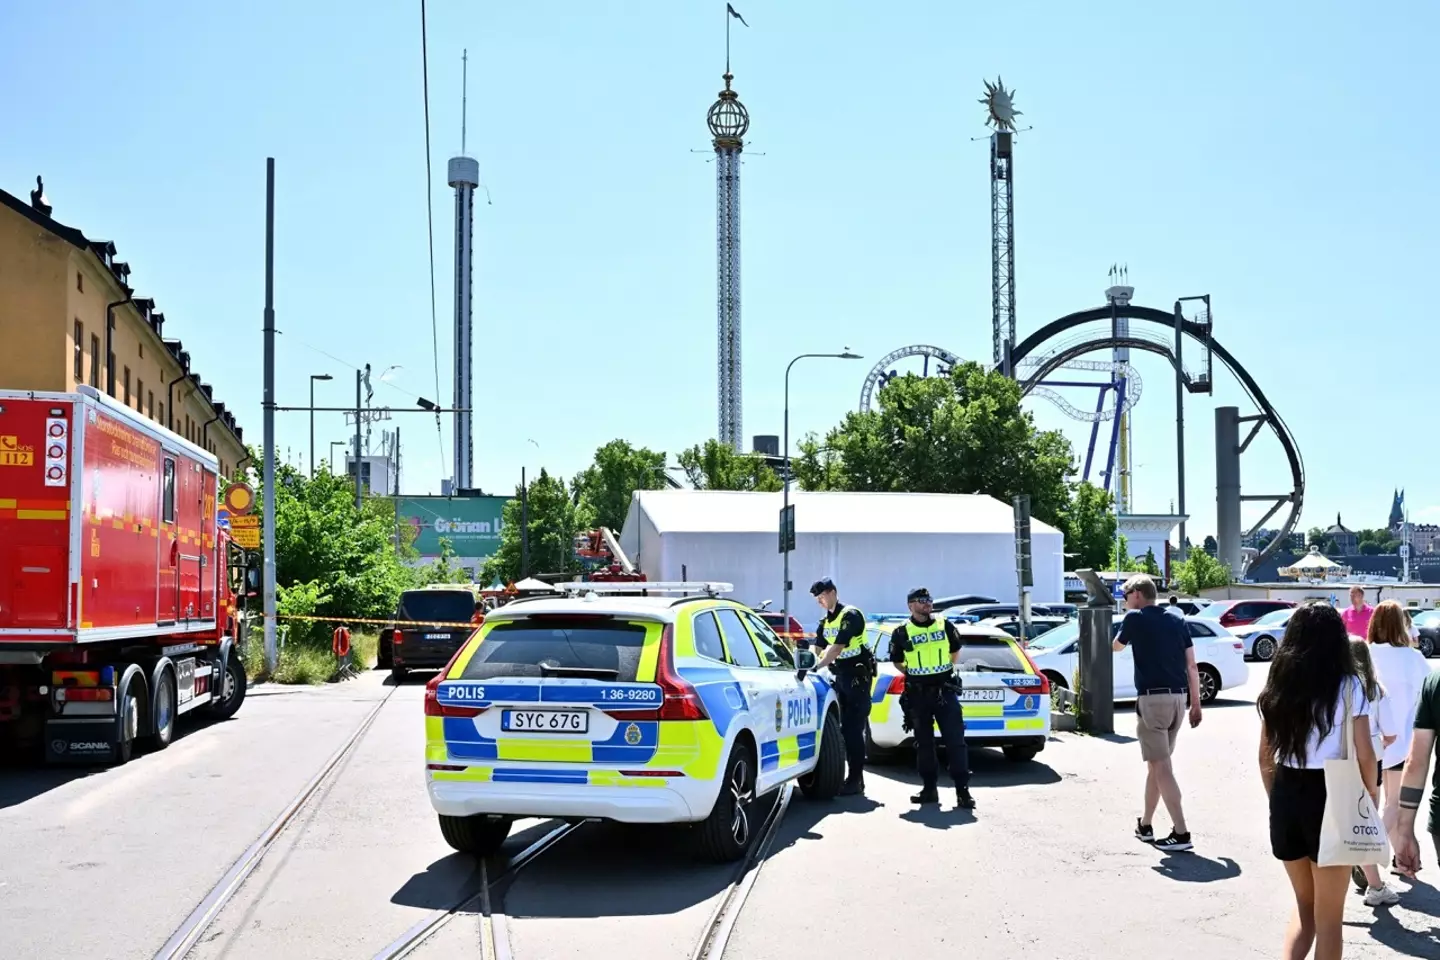 Several people have been injured in a ‘serious’ theme park rollercoaster accident in Stockholm's Grona Lund amusement park.